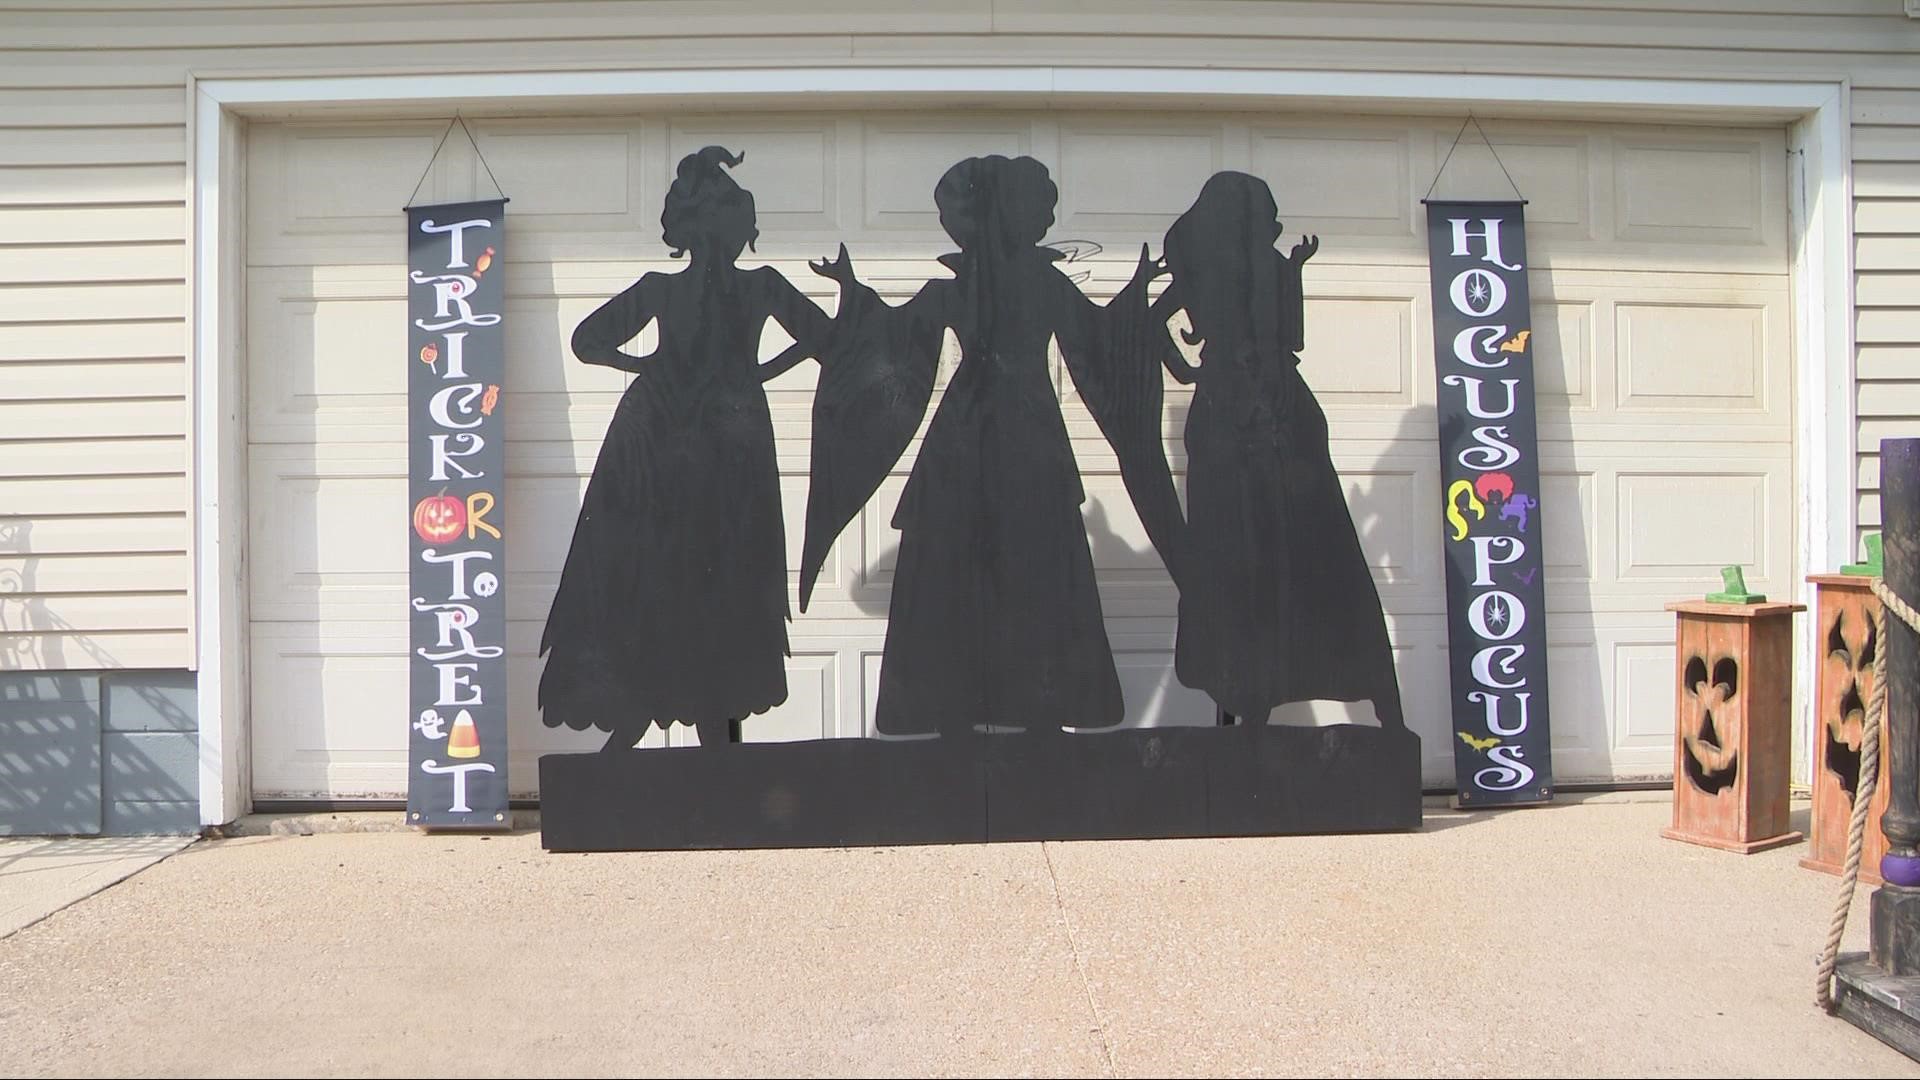 Check this out! These Halloween decorations can be found at a home on East 30th in Lorain.